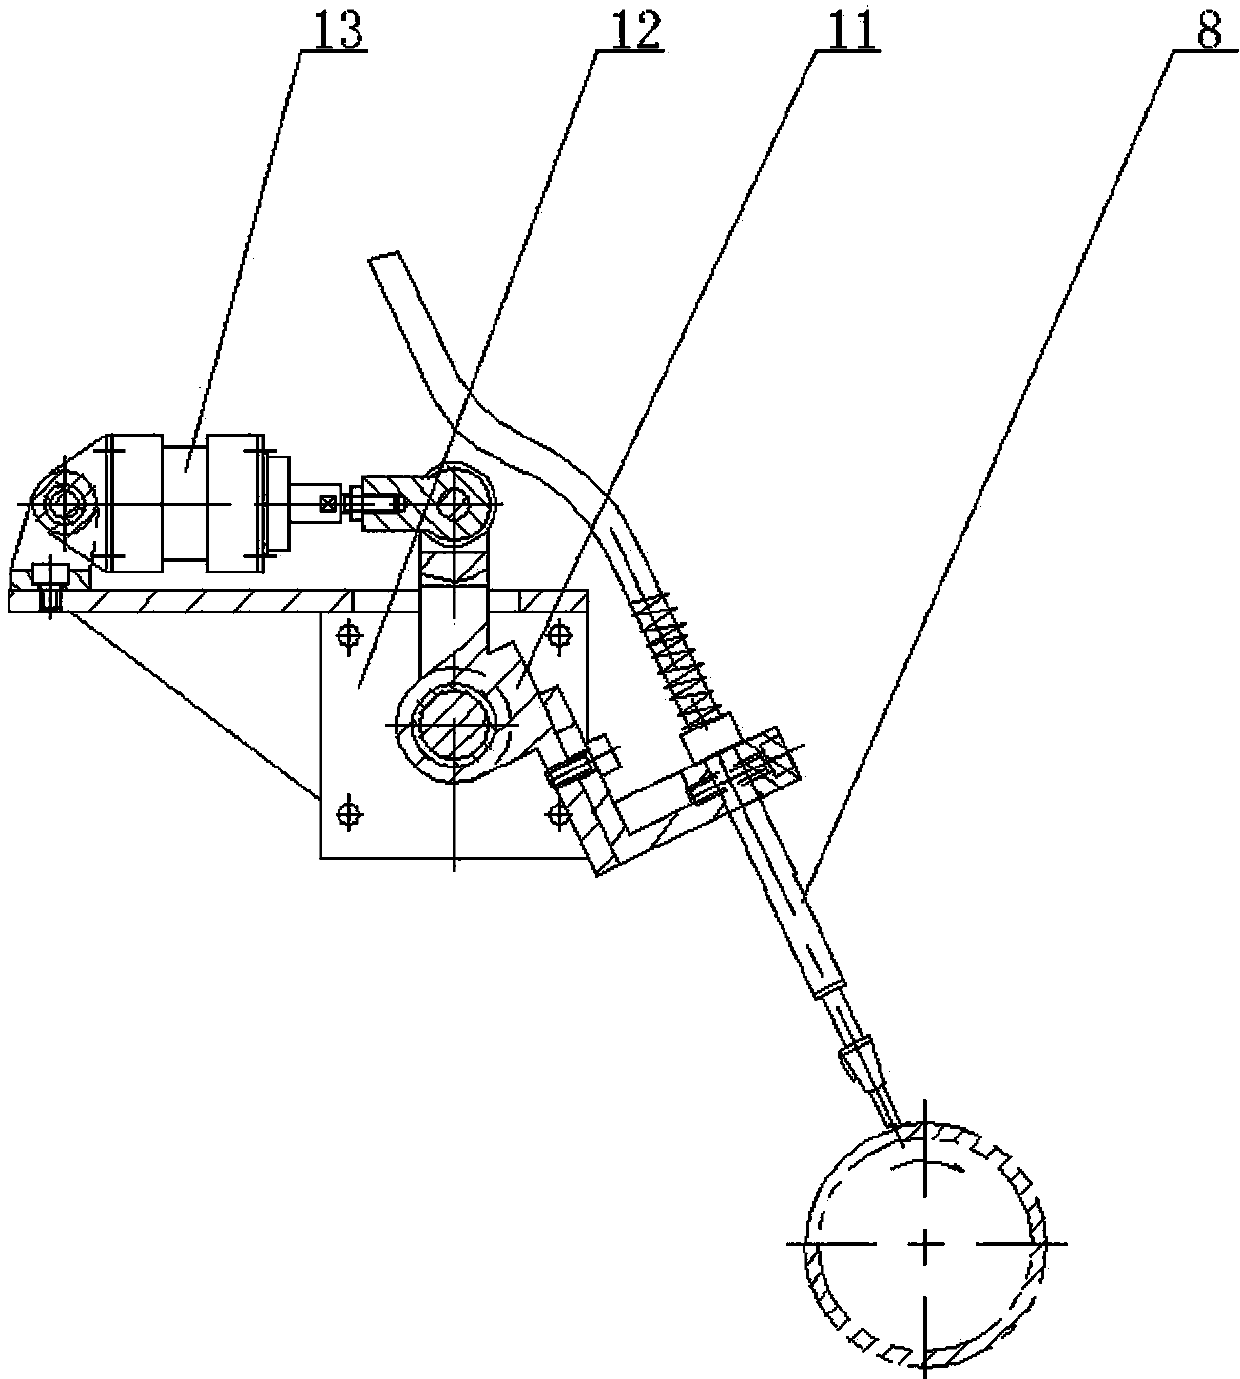 90-degree elbow and flange butt welding semi-automatic equipment